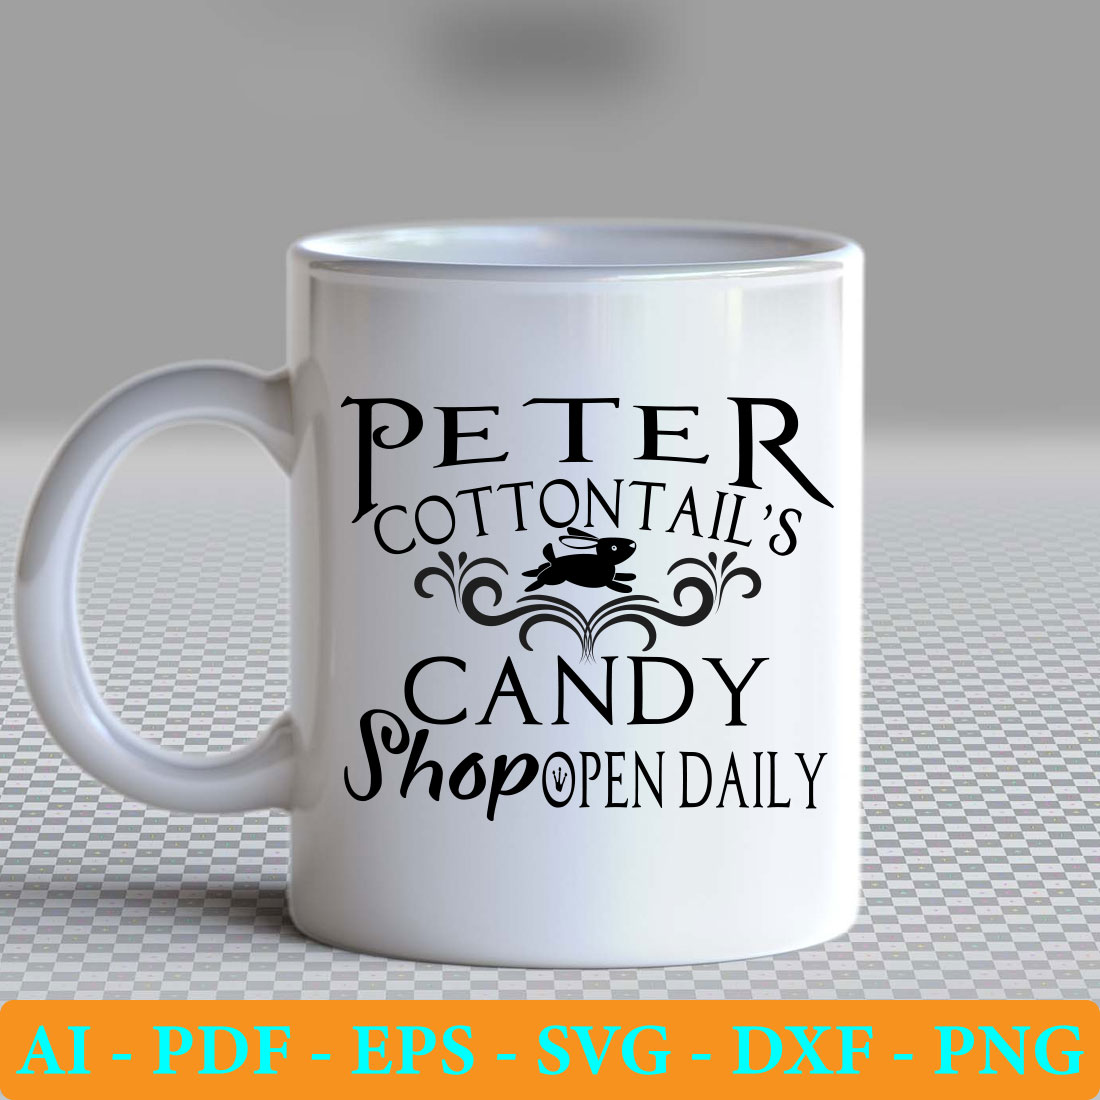 White coffee mug with the words peter cottontails candy shoppen daily.